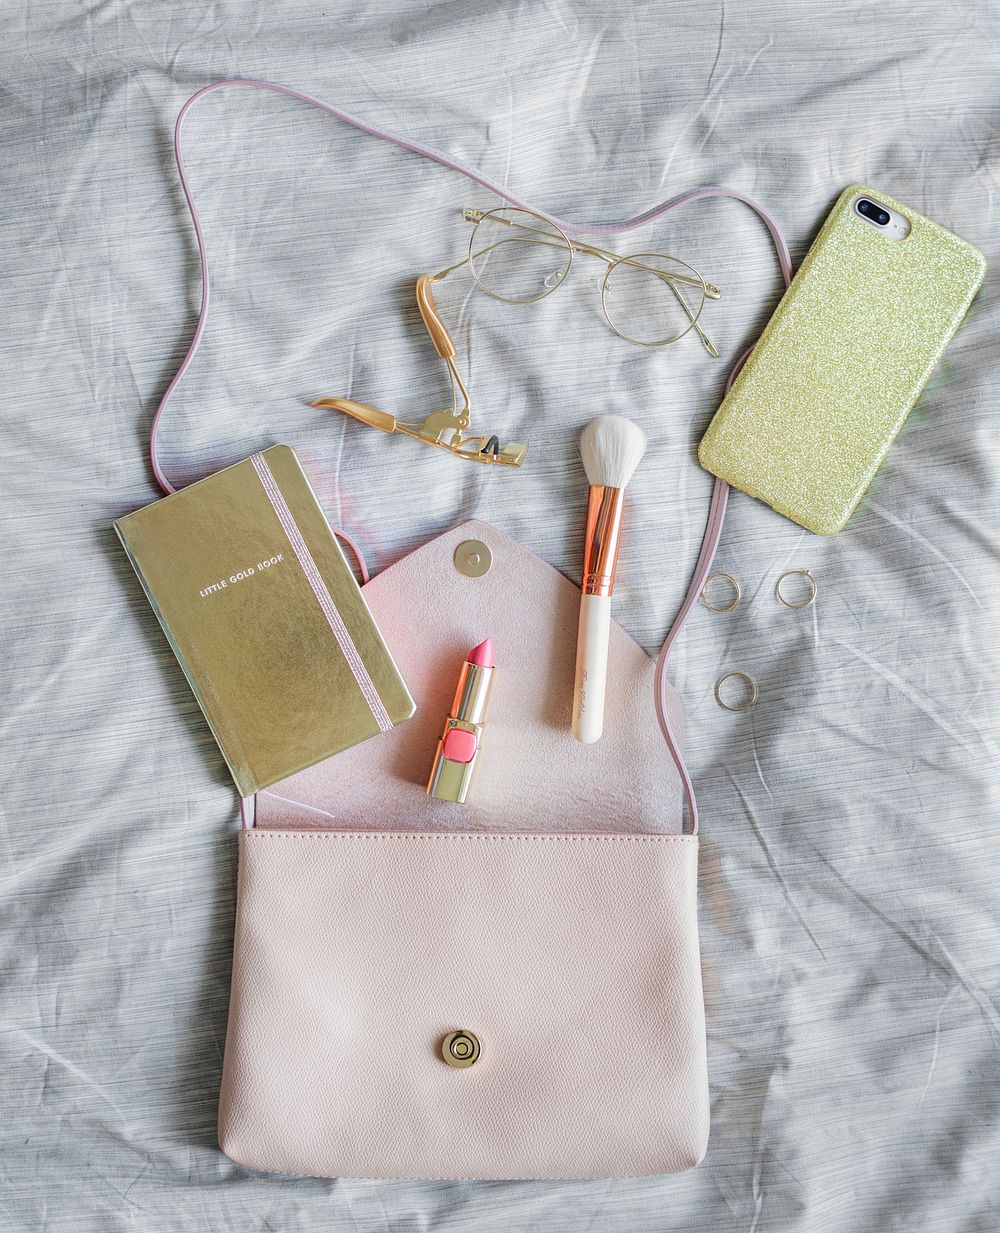 Flat lay of woman cosmetic isolated